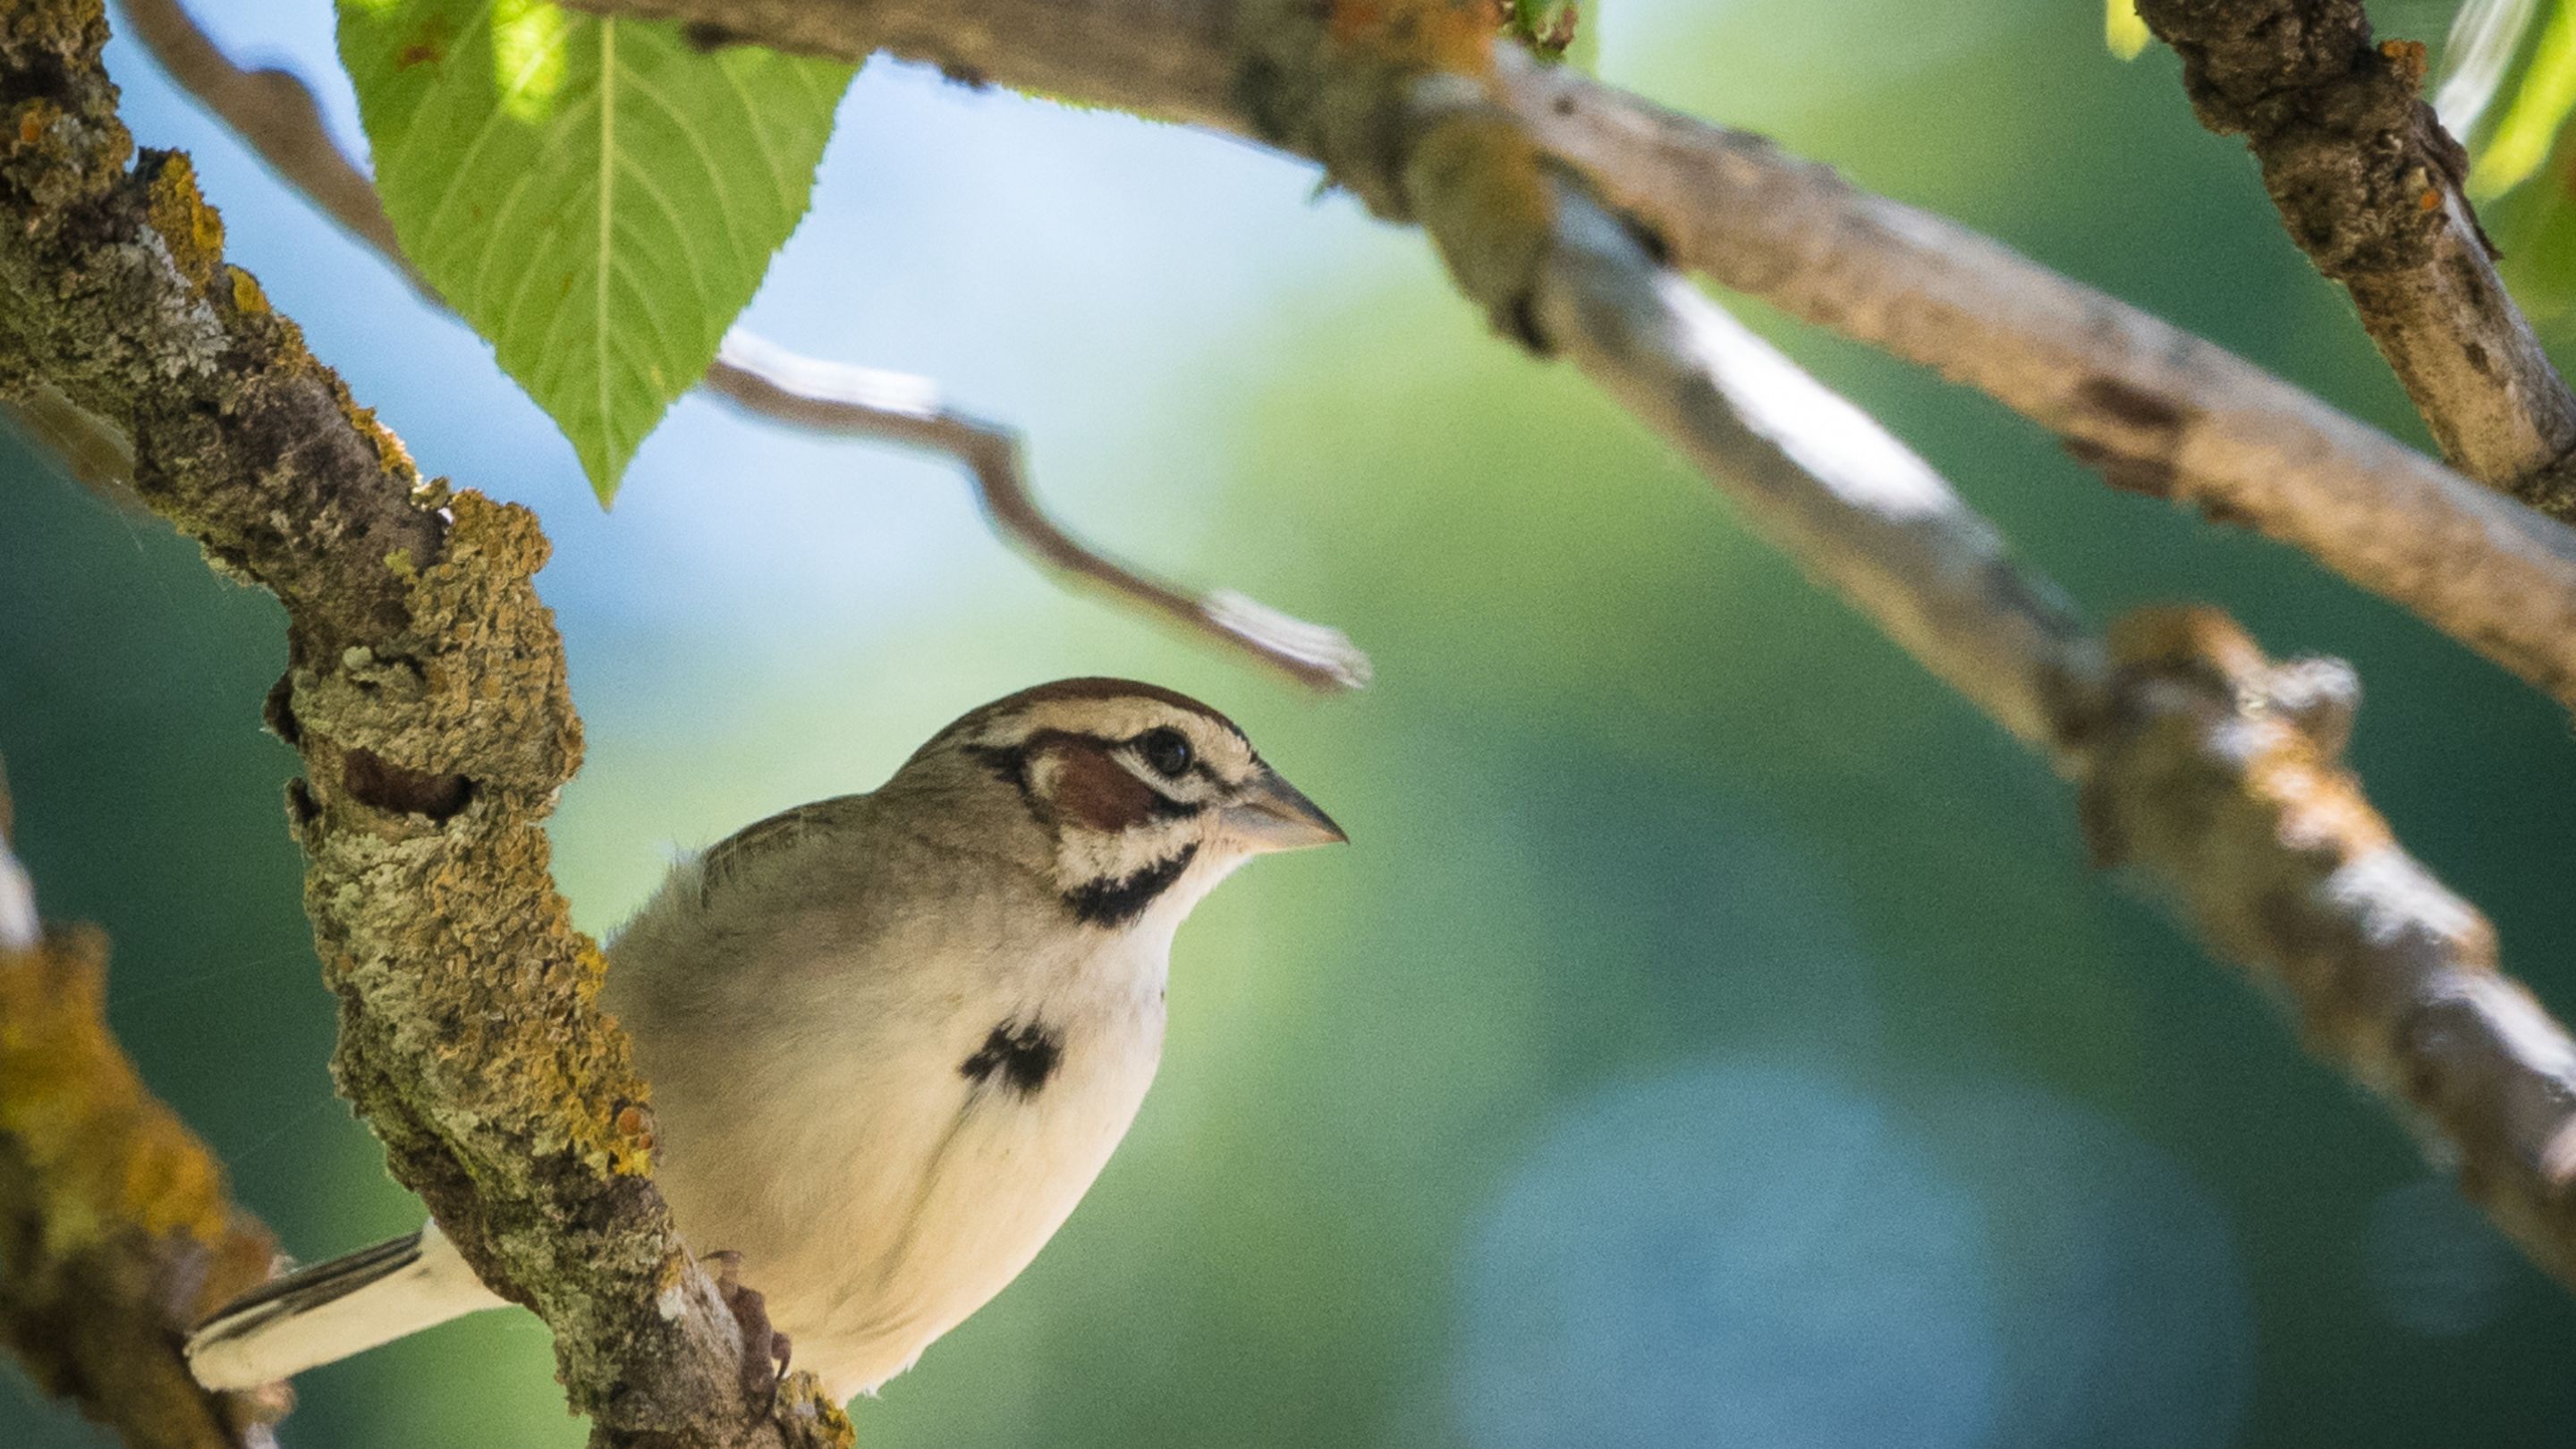 A lark sparrow on a branch with green leaves behind it